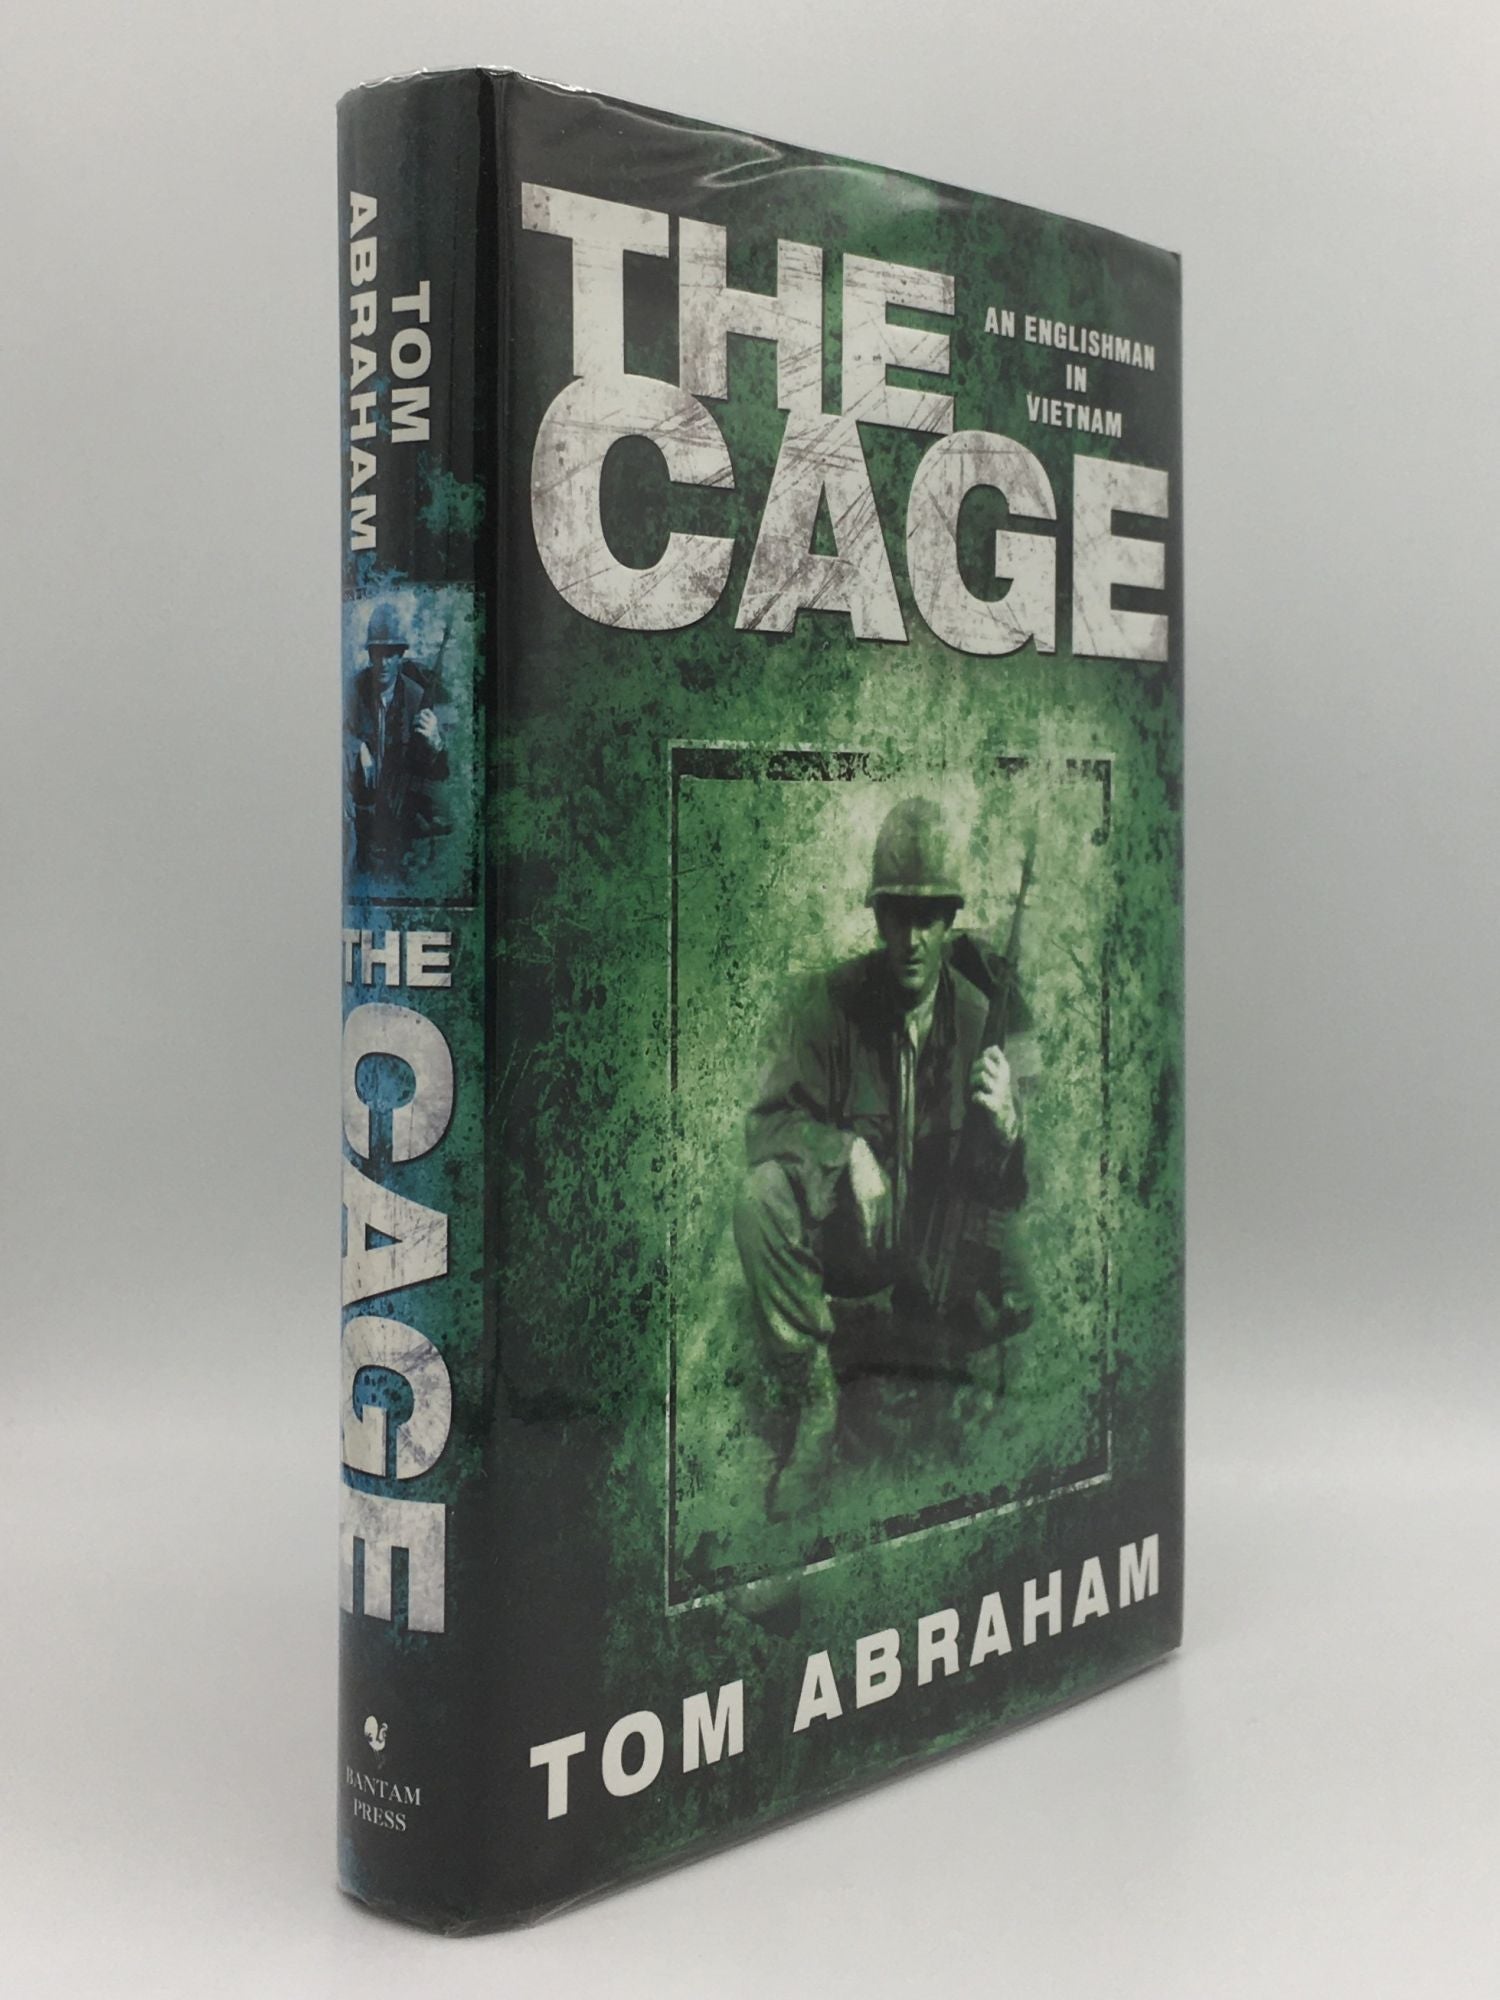 ABRAHAM Tom - The Cage an Englishman in Vietnam